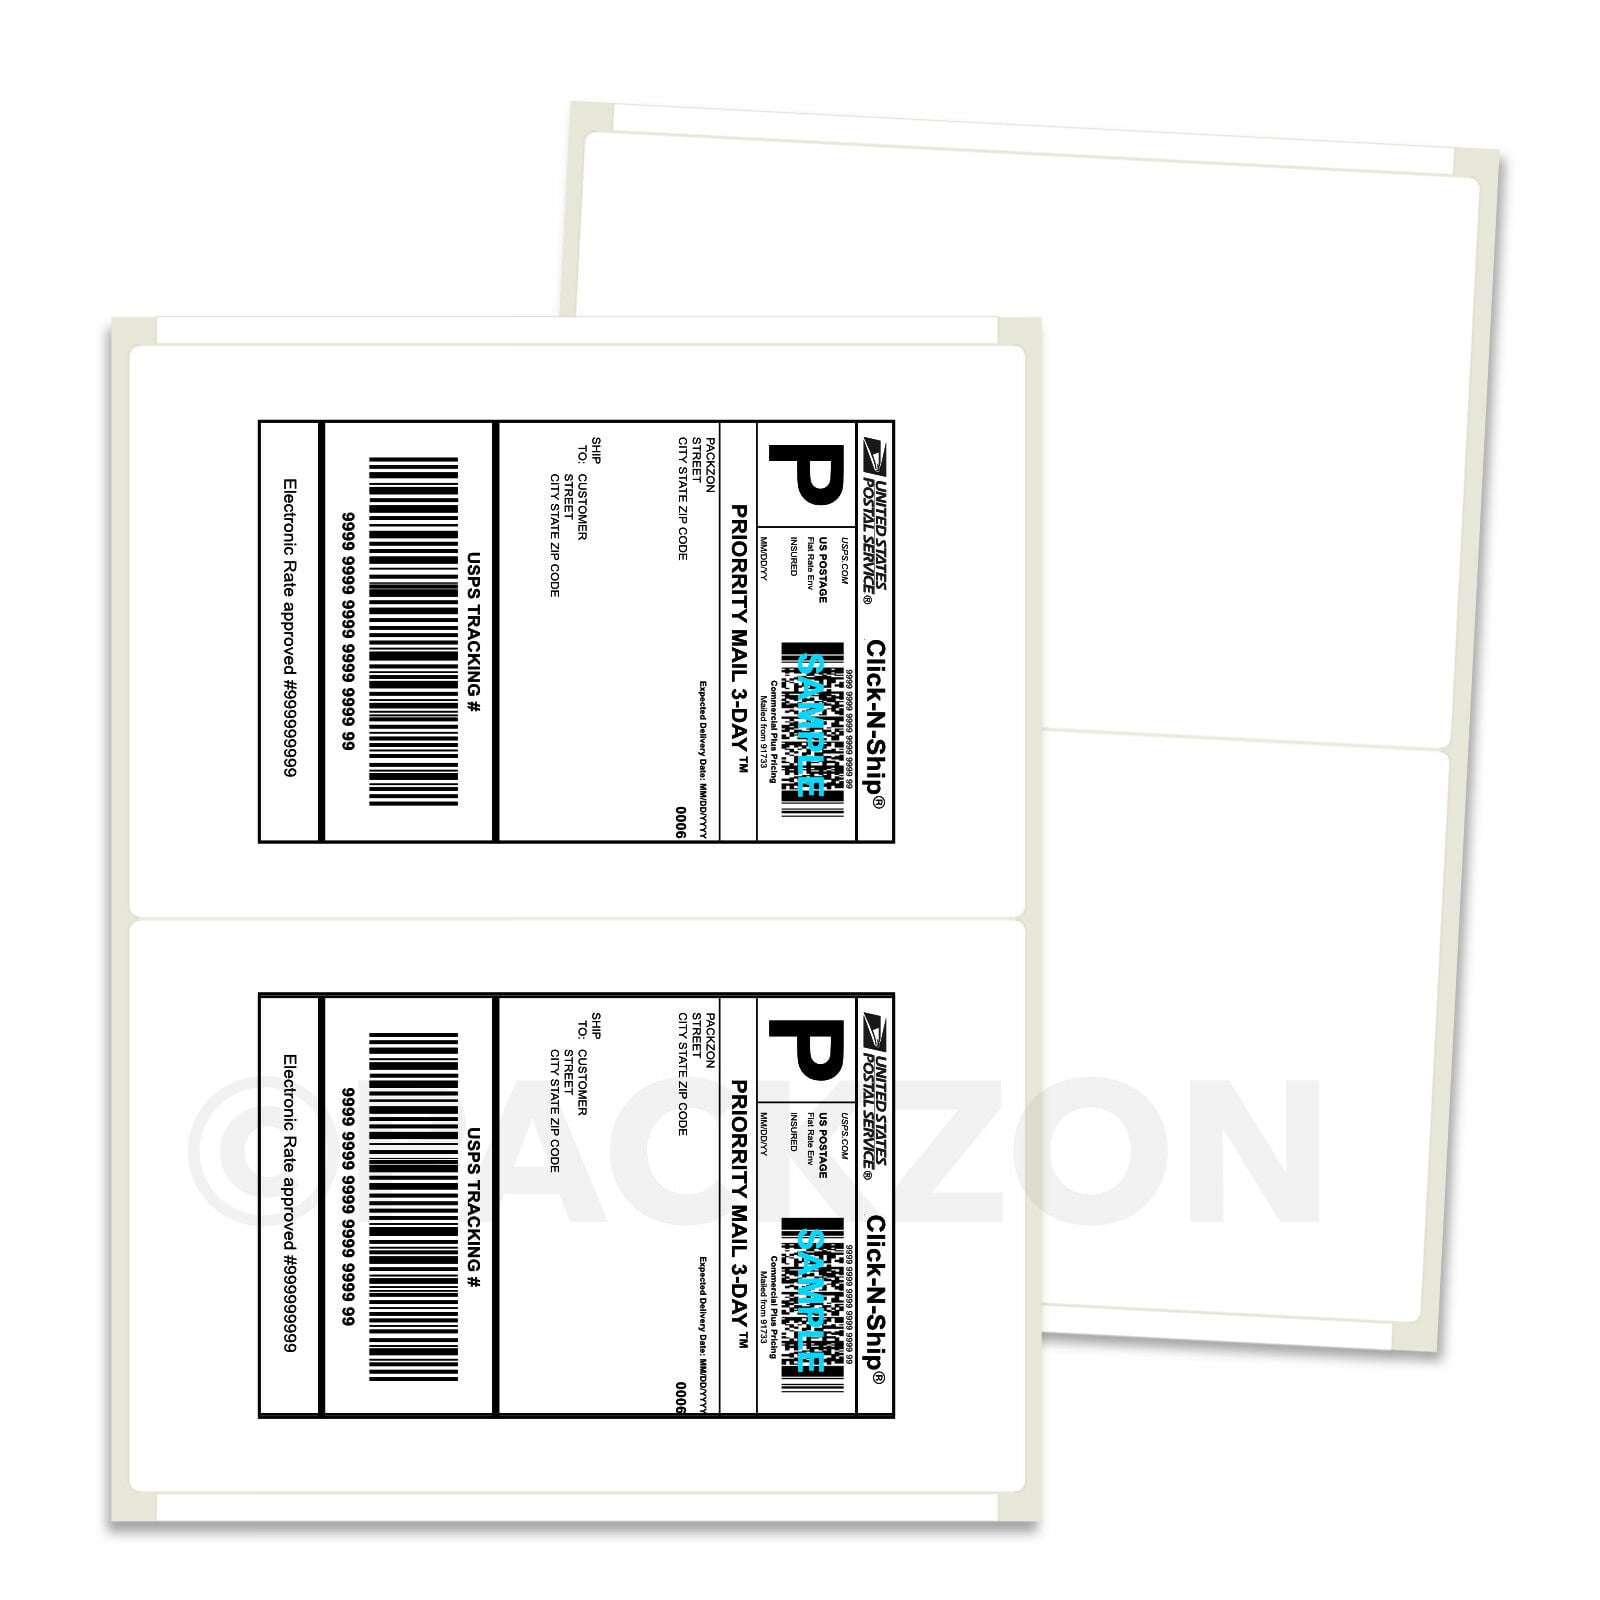 600 Perforated Rounded Corner Shipping Labels 2 Per Sheet-8.5 x 11-Self Adhesive 